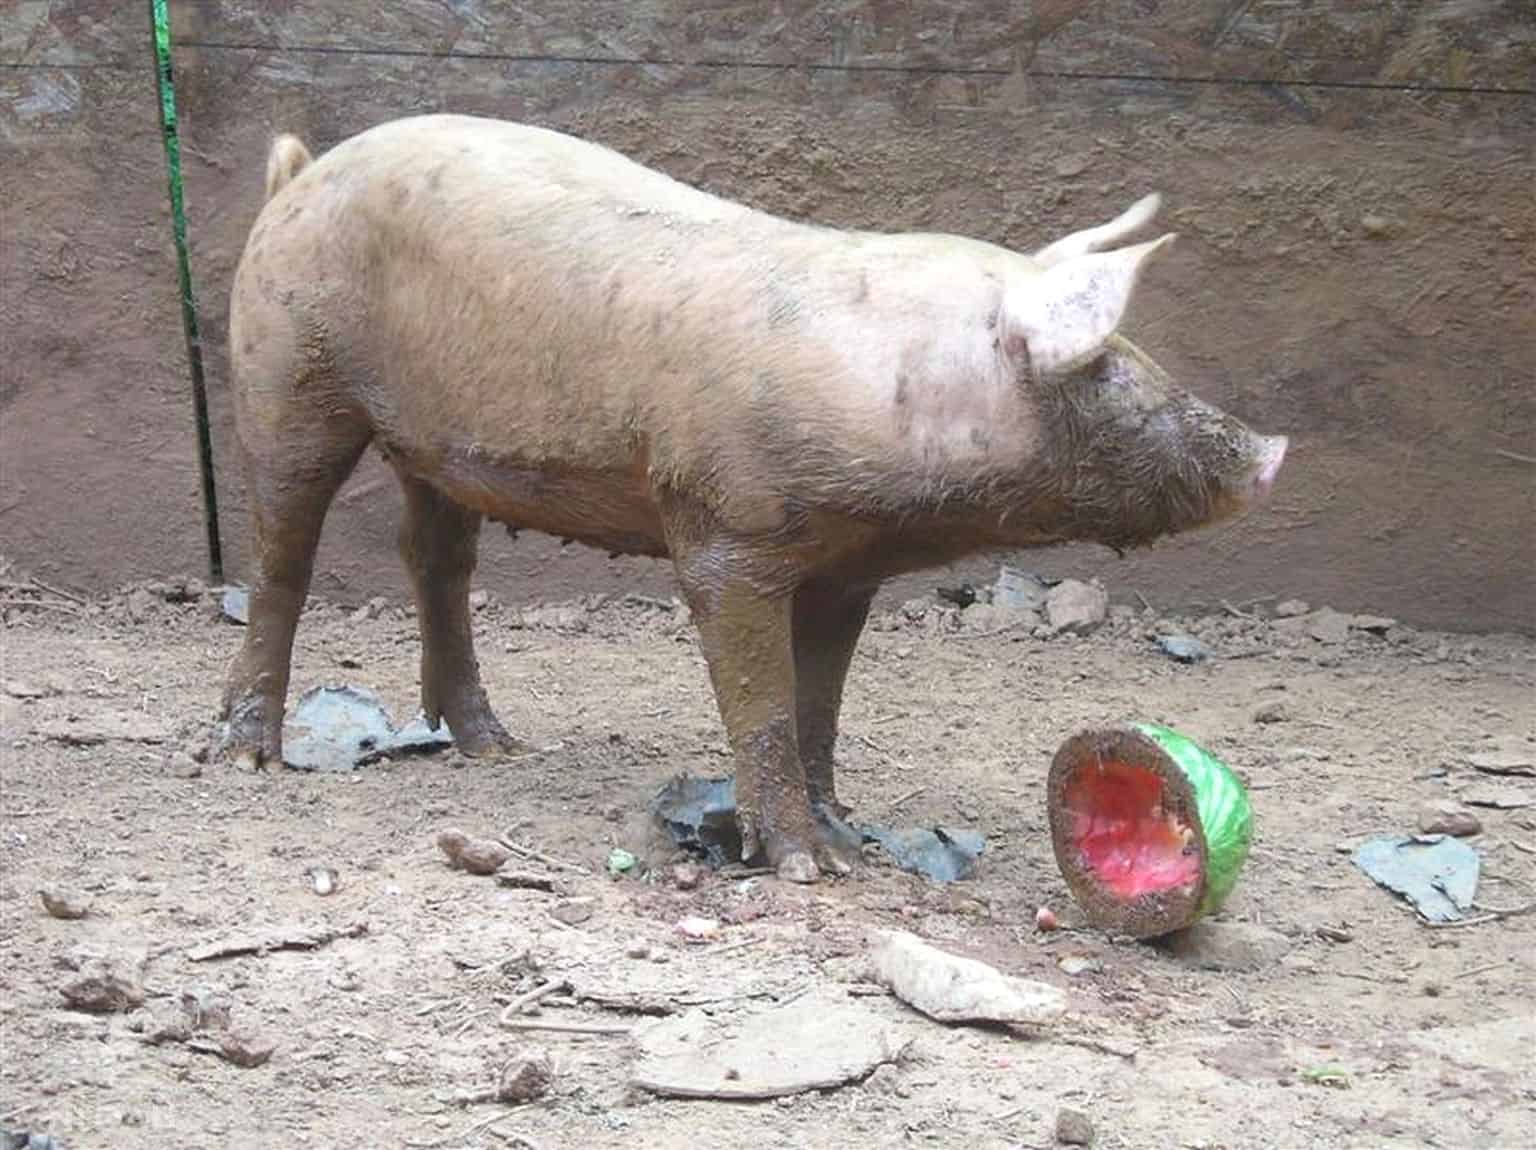 a pig eating watermelon